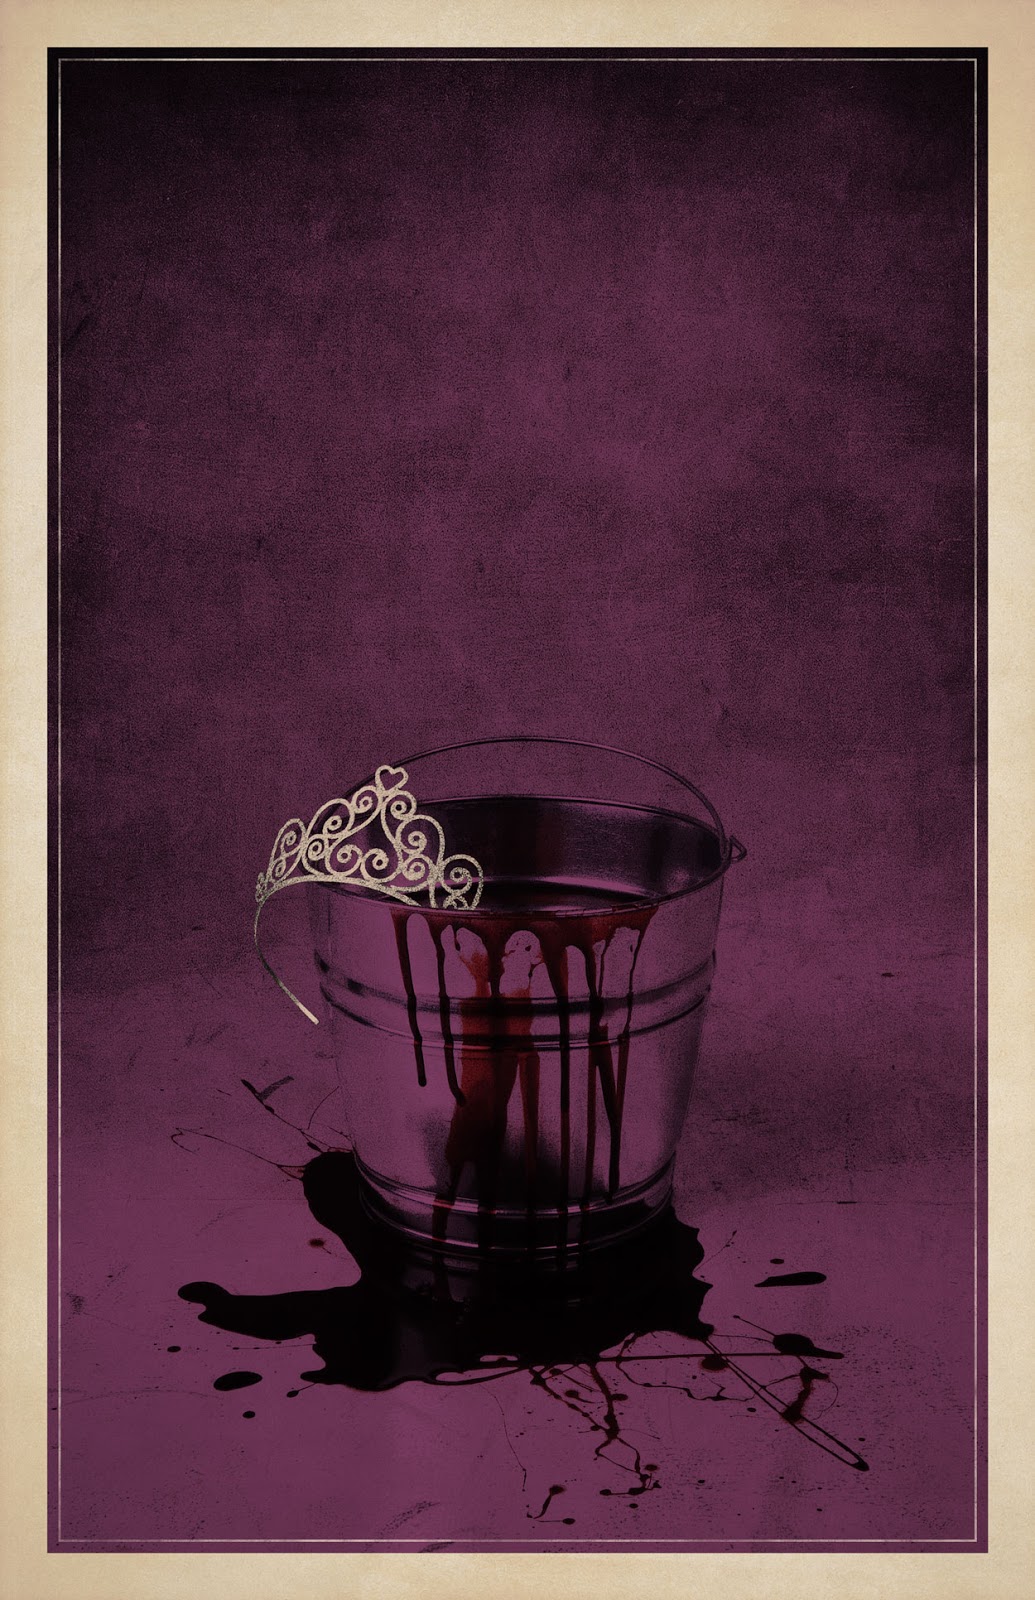 Carrie-Minimalist-Poster[1]